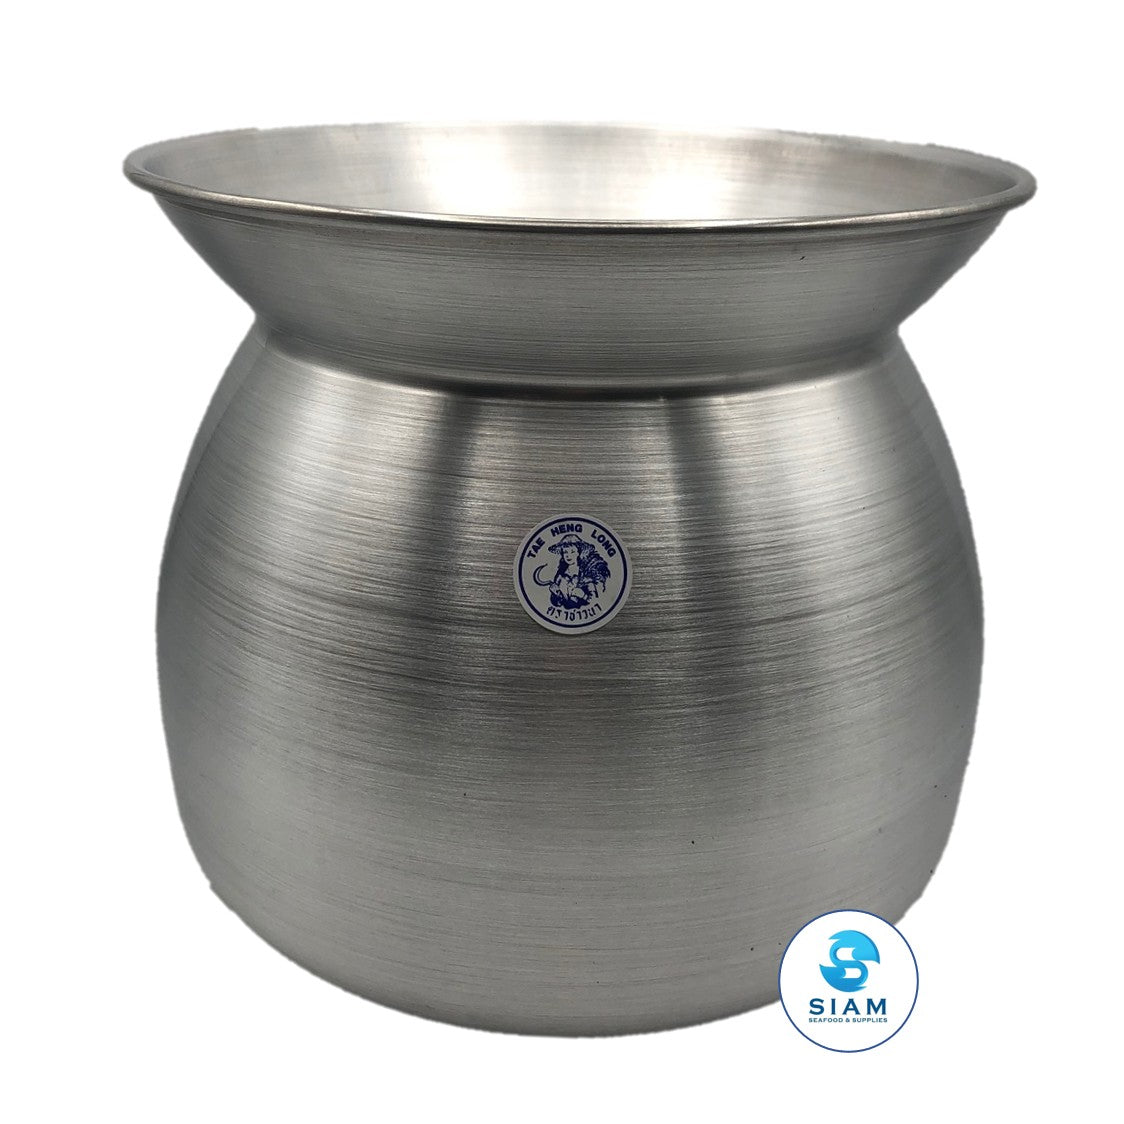 PANWA Sticky Rice Aluminum Cook Pot from Thailand - Genuine Replacement Pot  for Traditional Steamer Crock, Family Size 8.67 Inch Standard Diameter (22